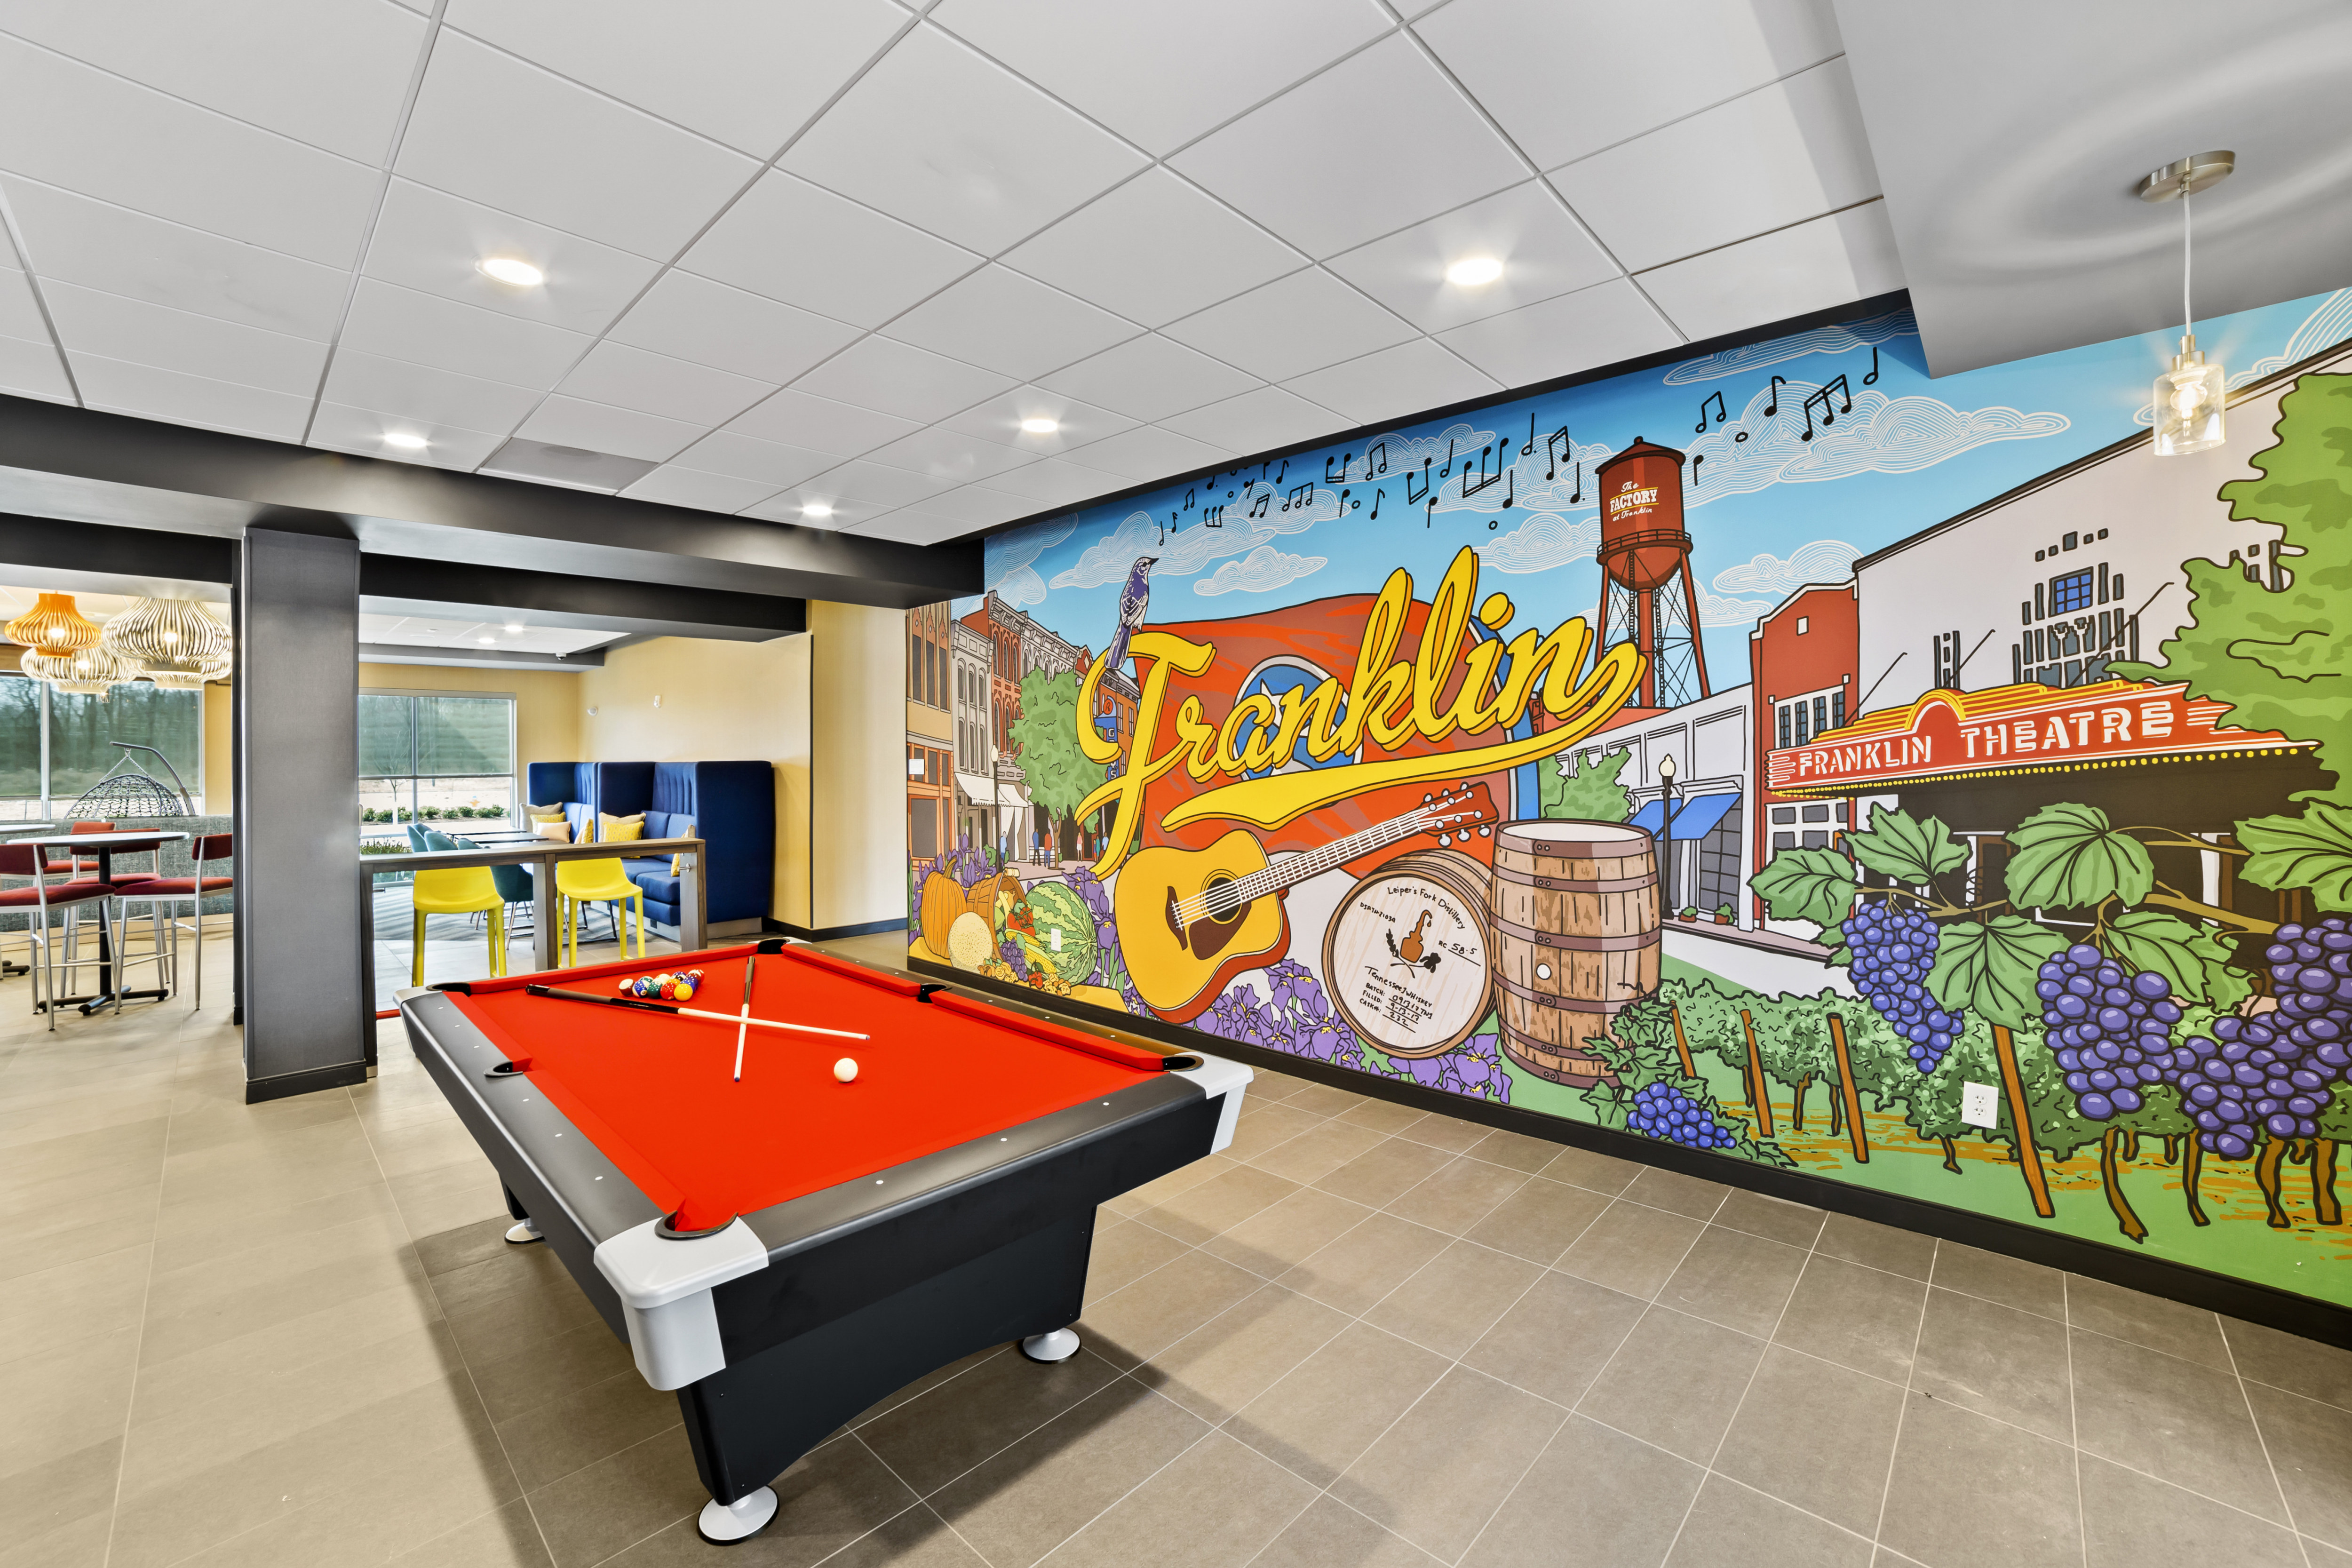 Lobby Pool Table With Destination Art Wall